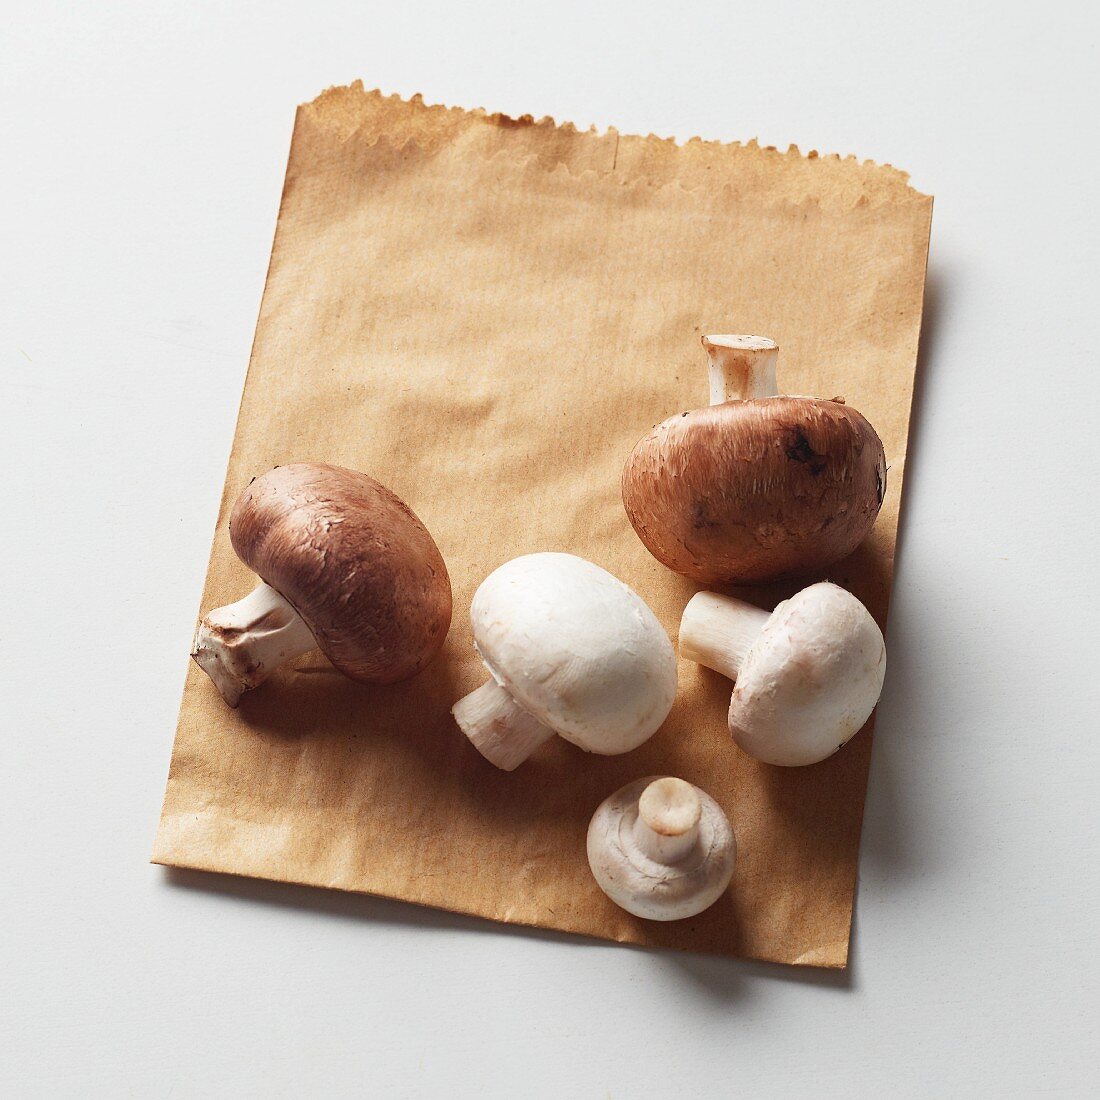 Chestnut and button mushrooms on a brown paper bag